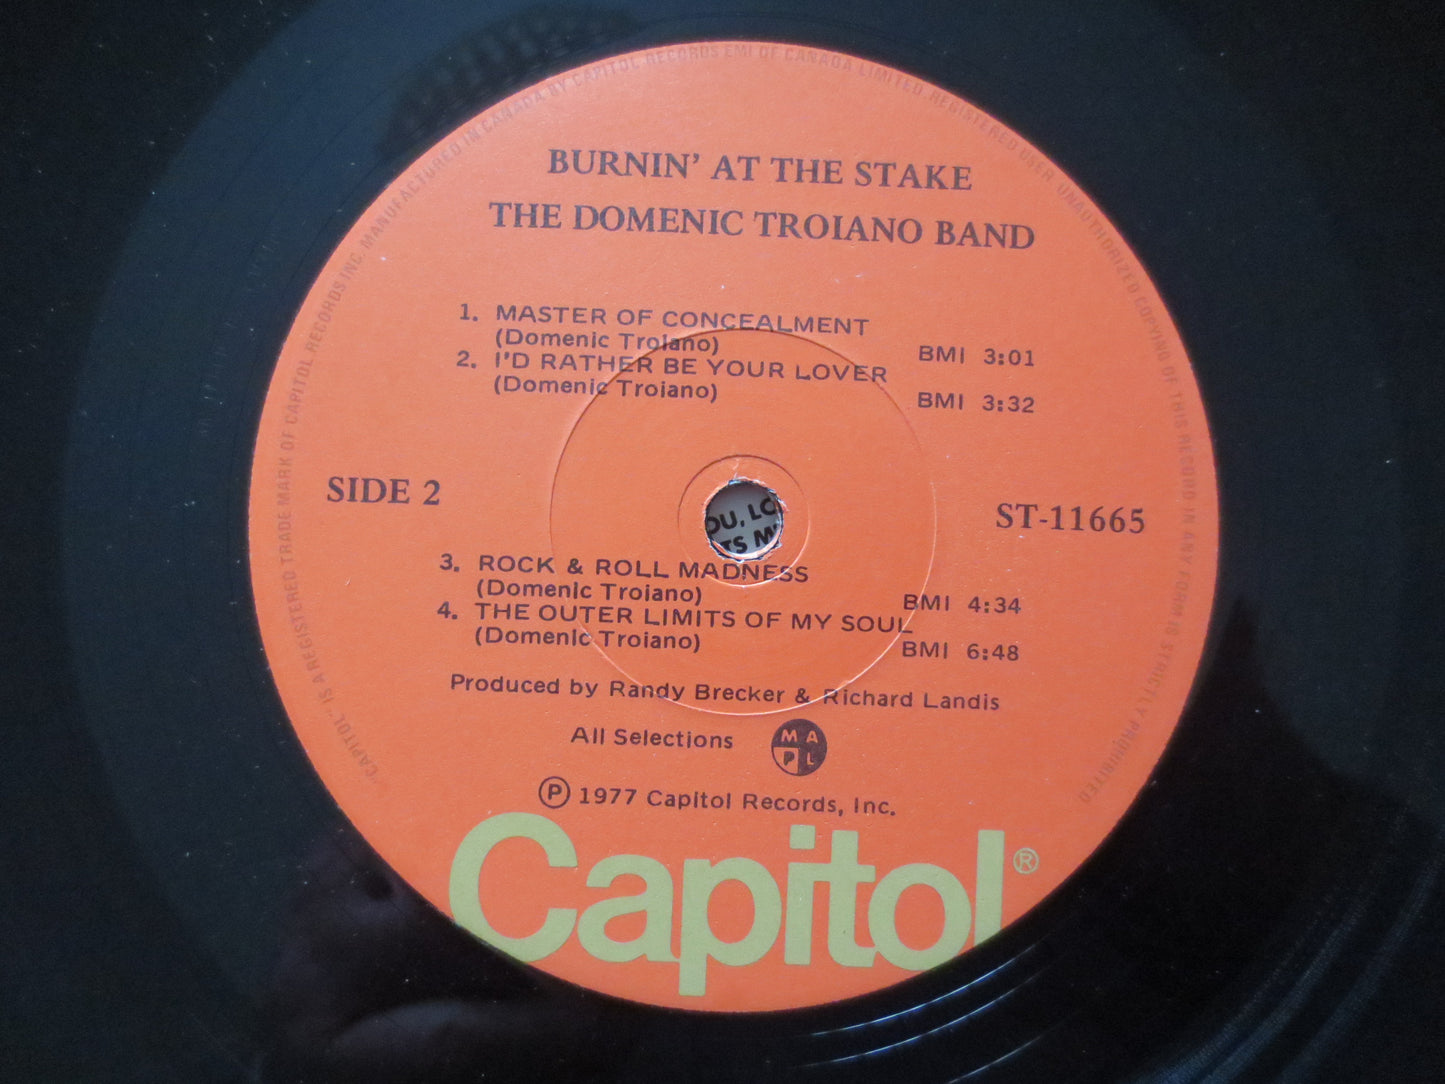 DOMINIC TROIANO, Burnin' at the Stake, Jazz Record, Jazz Rock Album, Jazz Album, Vintage Rock Album, Vinyl, 1977 Records